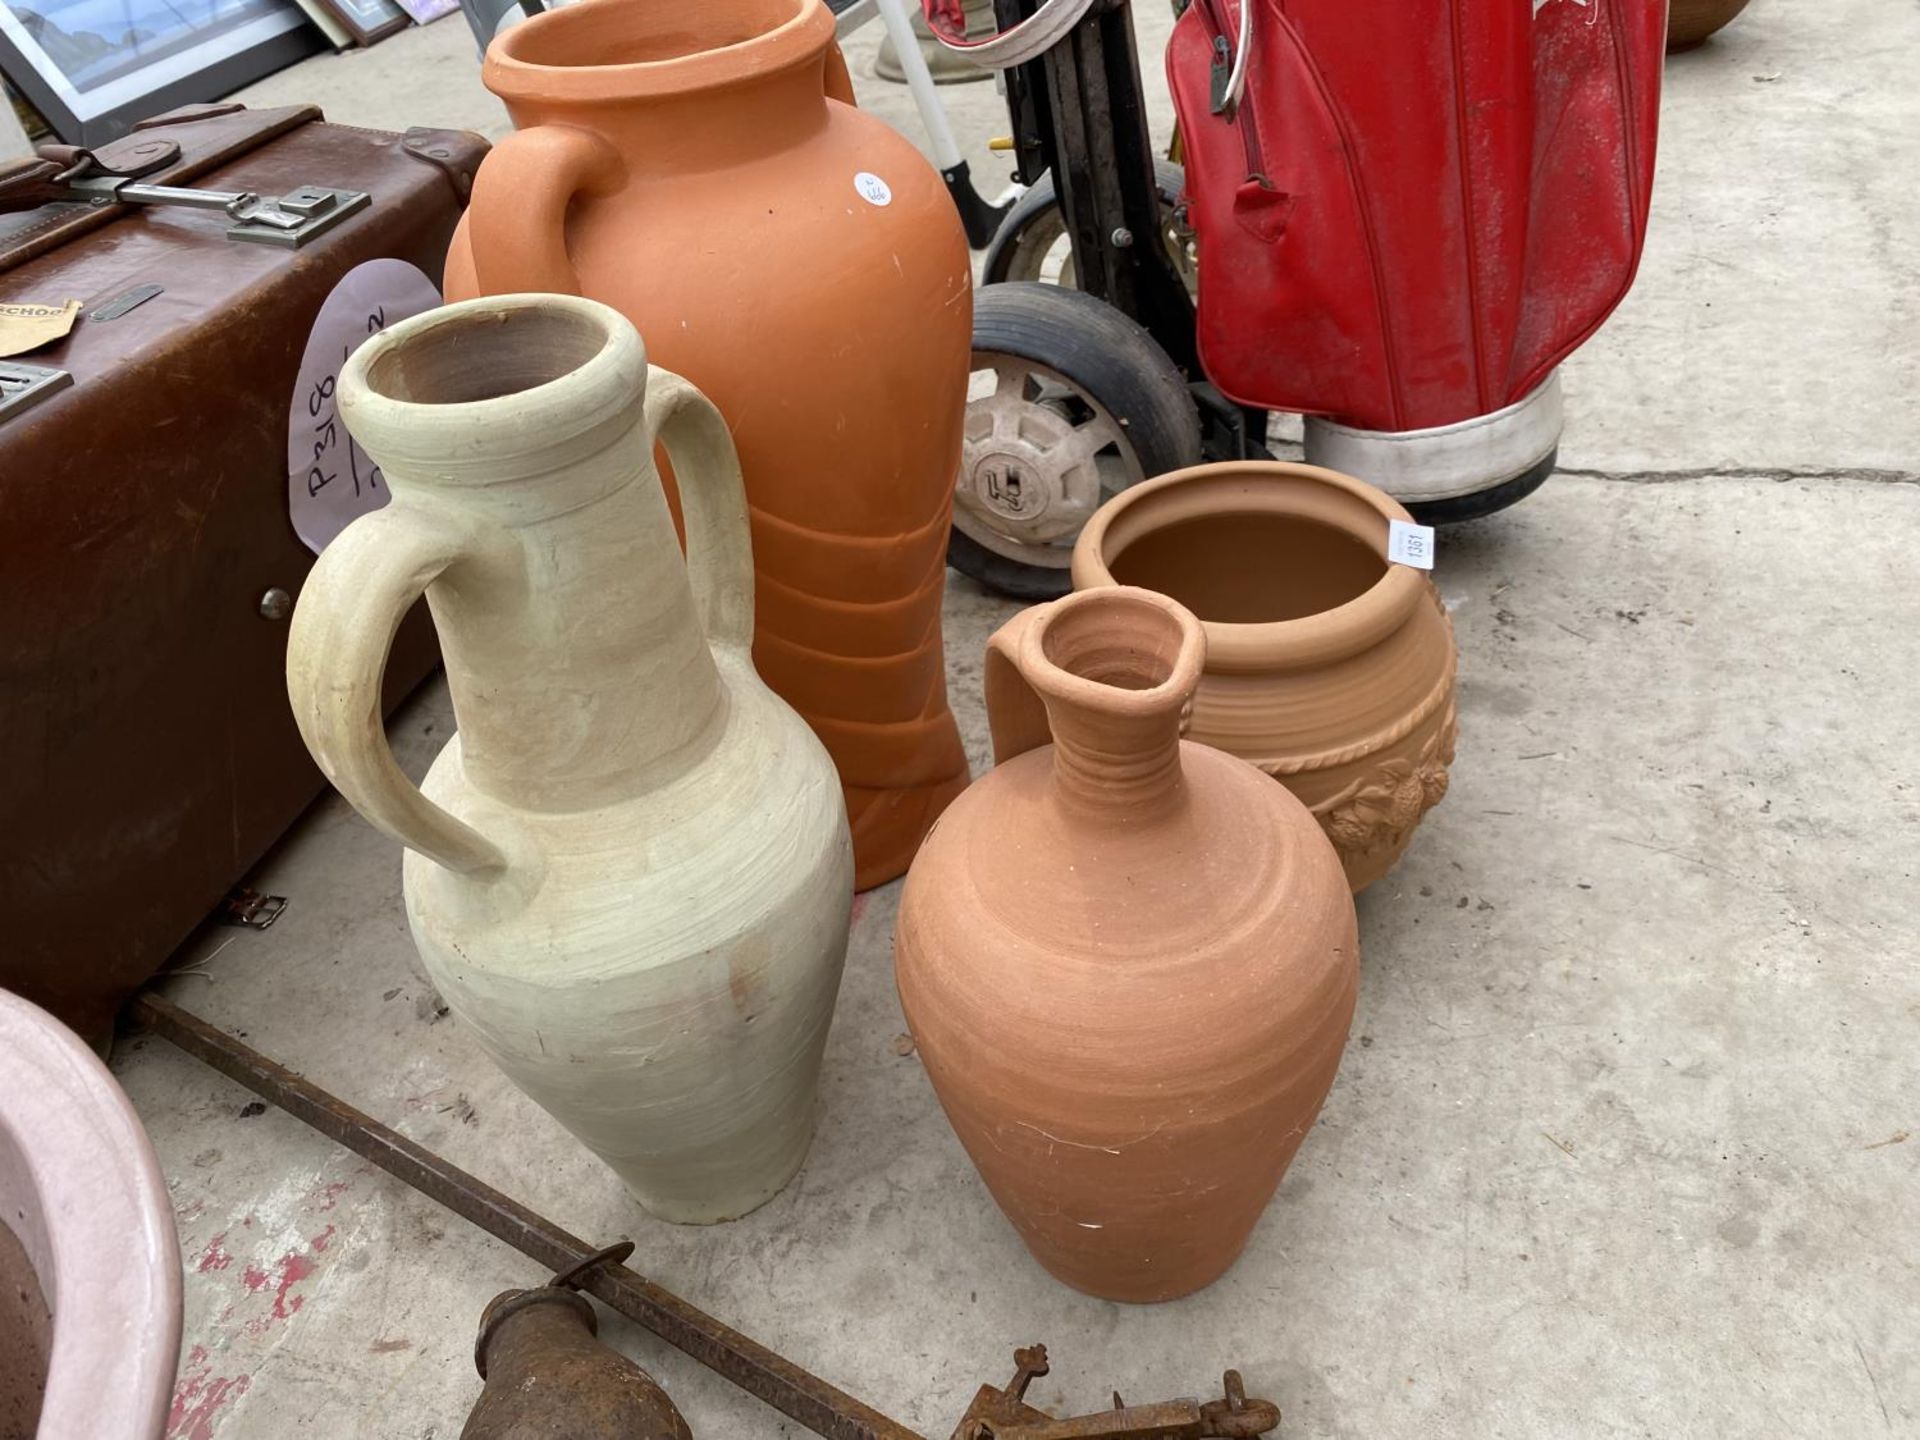 A TERRACOTTA PLANTER, A TERRACOTTA JUG AND TWO TERRACOTTA URNS - Image 2 of 4